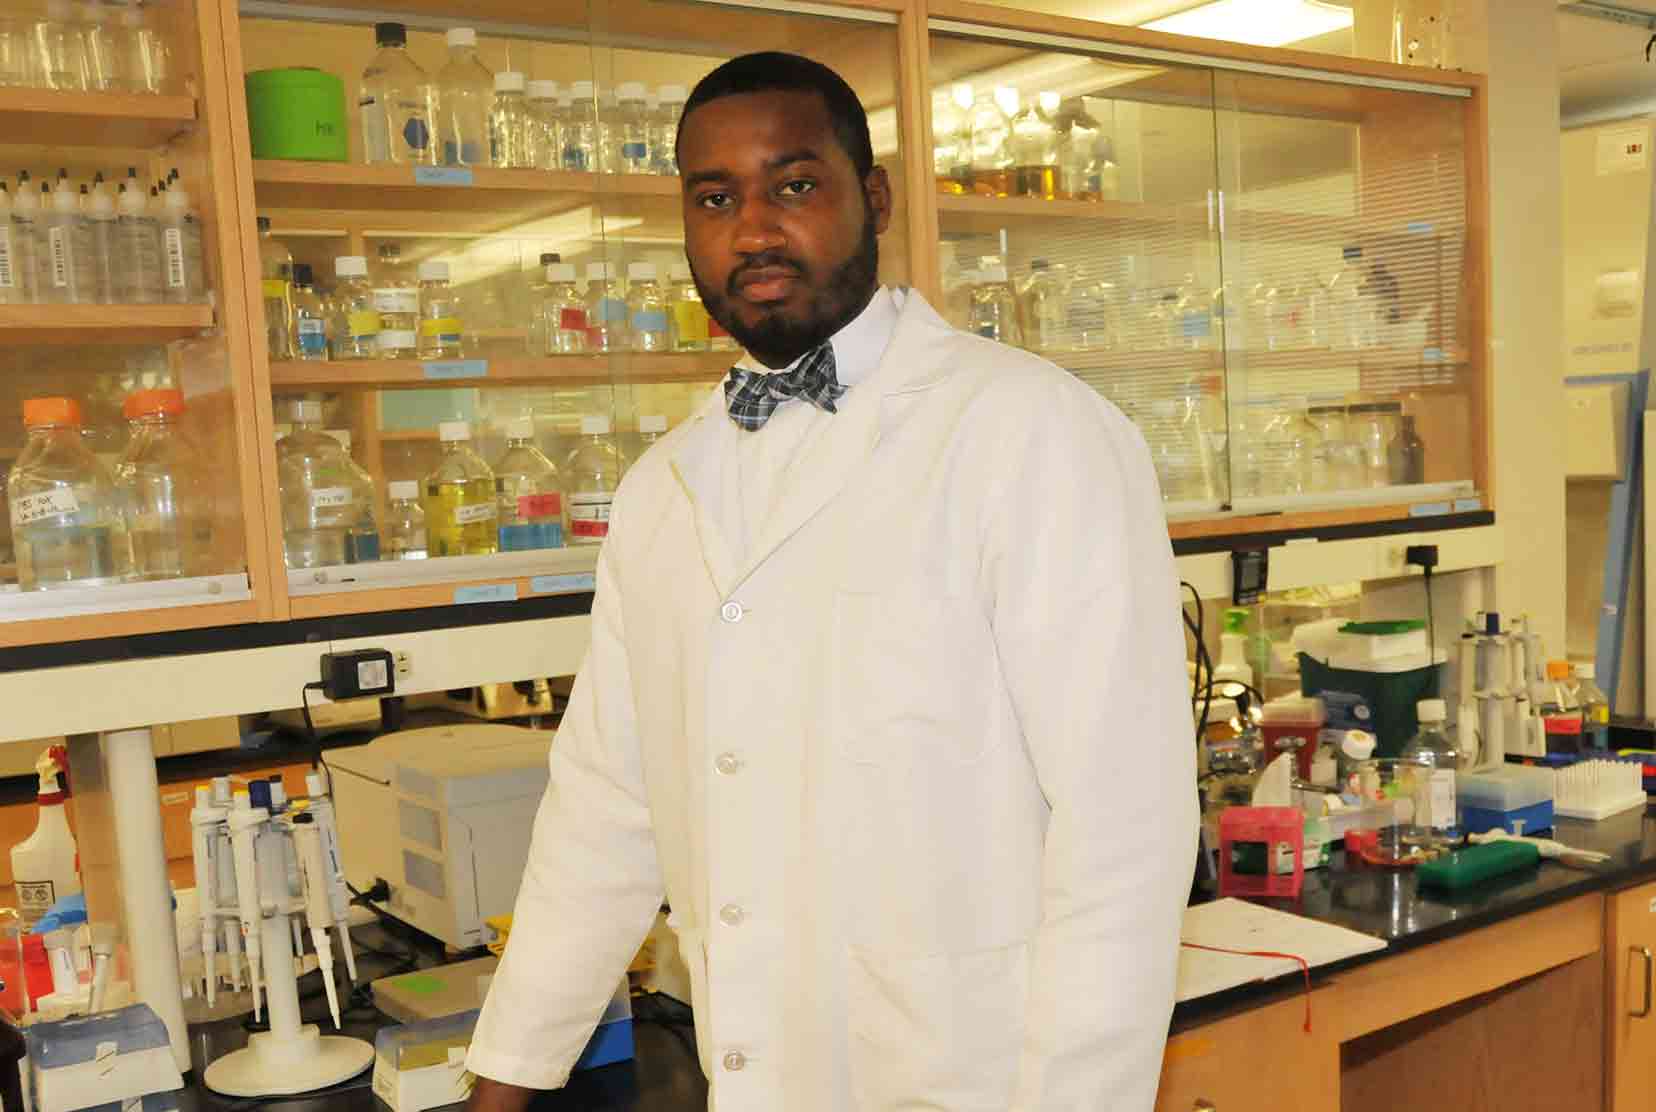 Dr. Derrick Scott, Associate Professor of Biological Sciences, is the 2021 recipient of the Faculty Excellence Award for Research and Creative Activities, joining three others who won FEA awards in other categories.